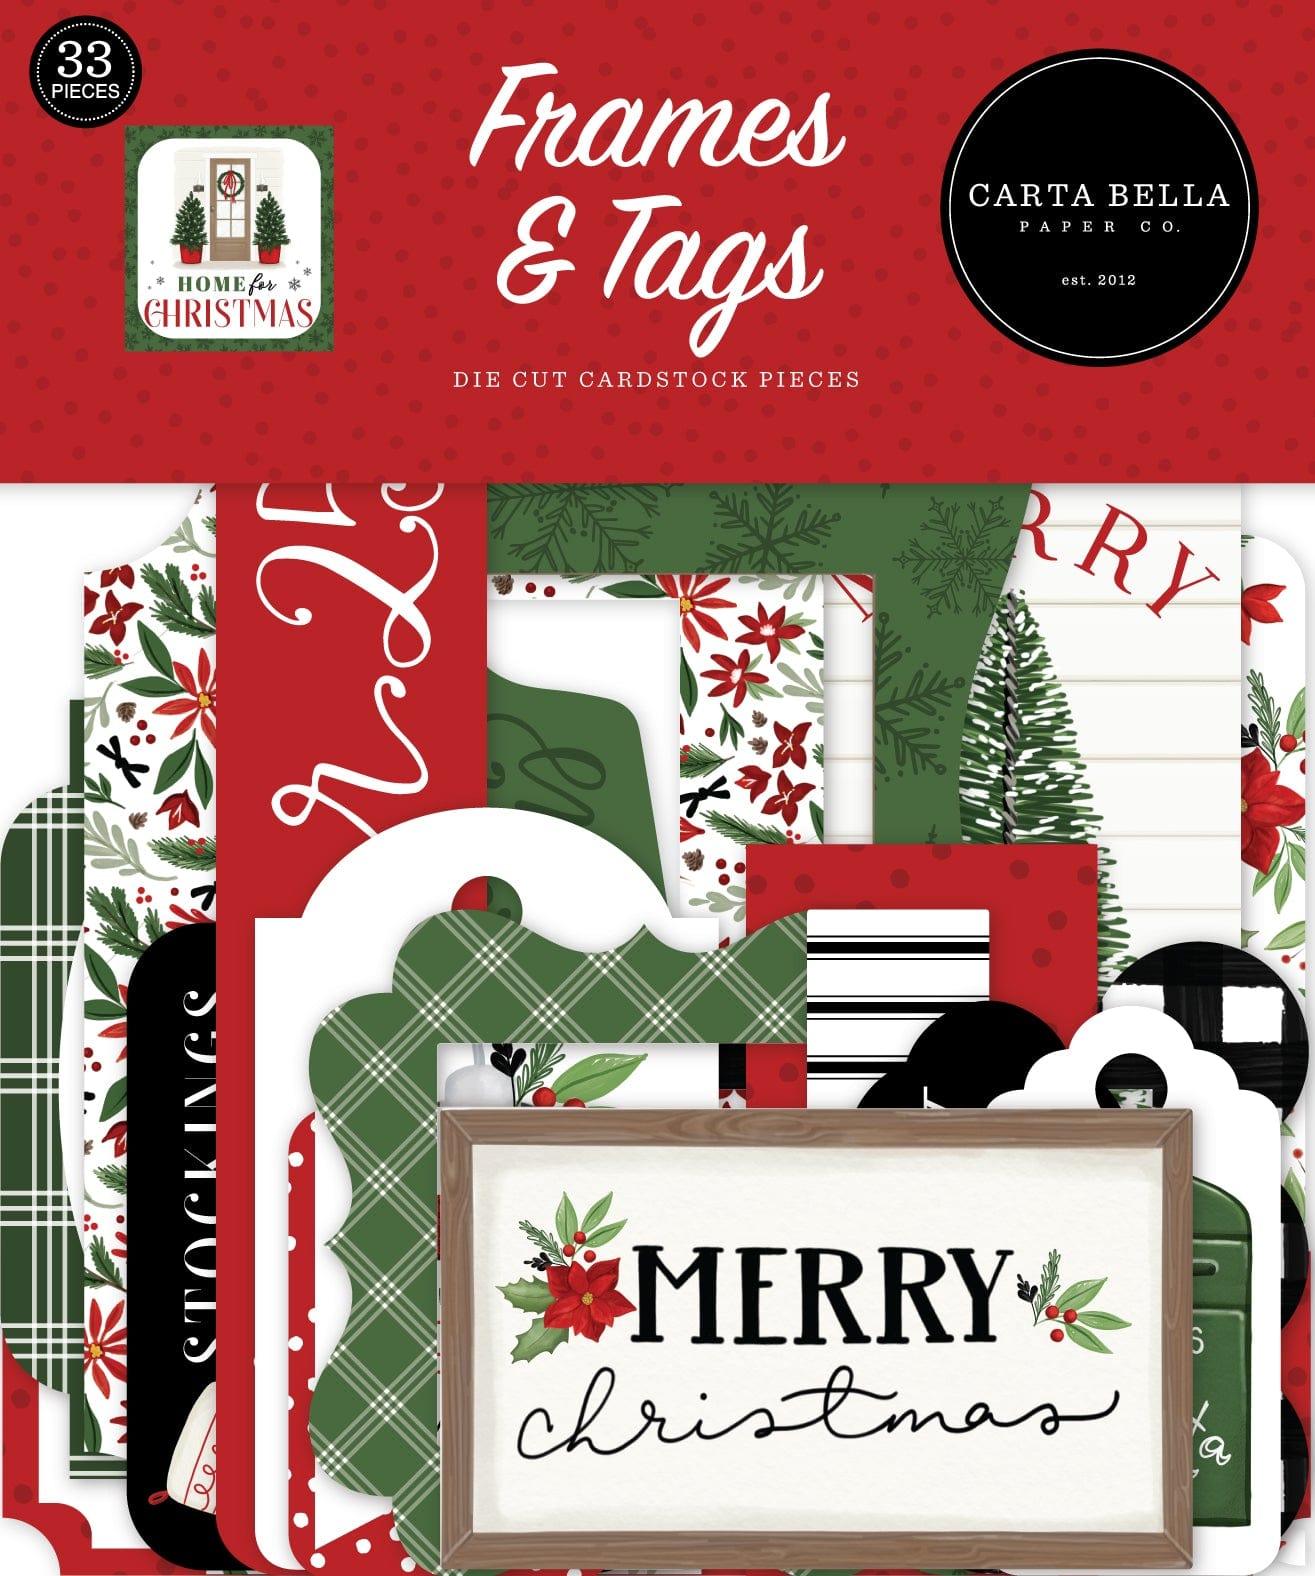 Home For Christmas Collection 5 x 5 Scrapbook Tags & Frames Die Cuts by Carta Bella - Scrapbook Supply Companies